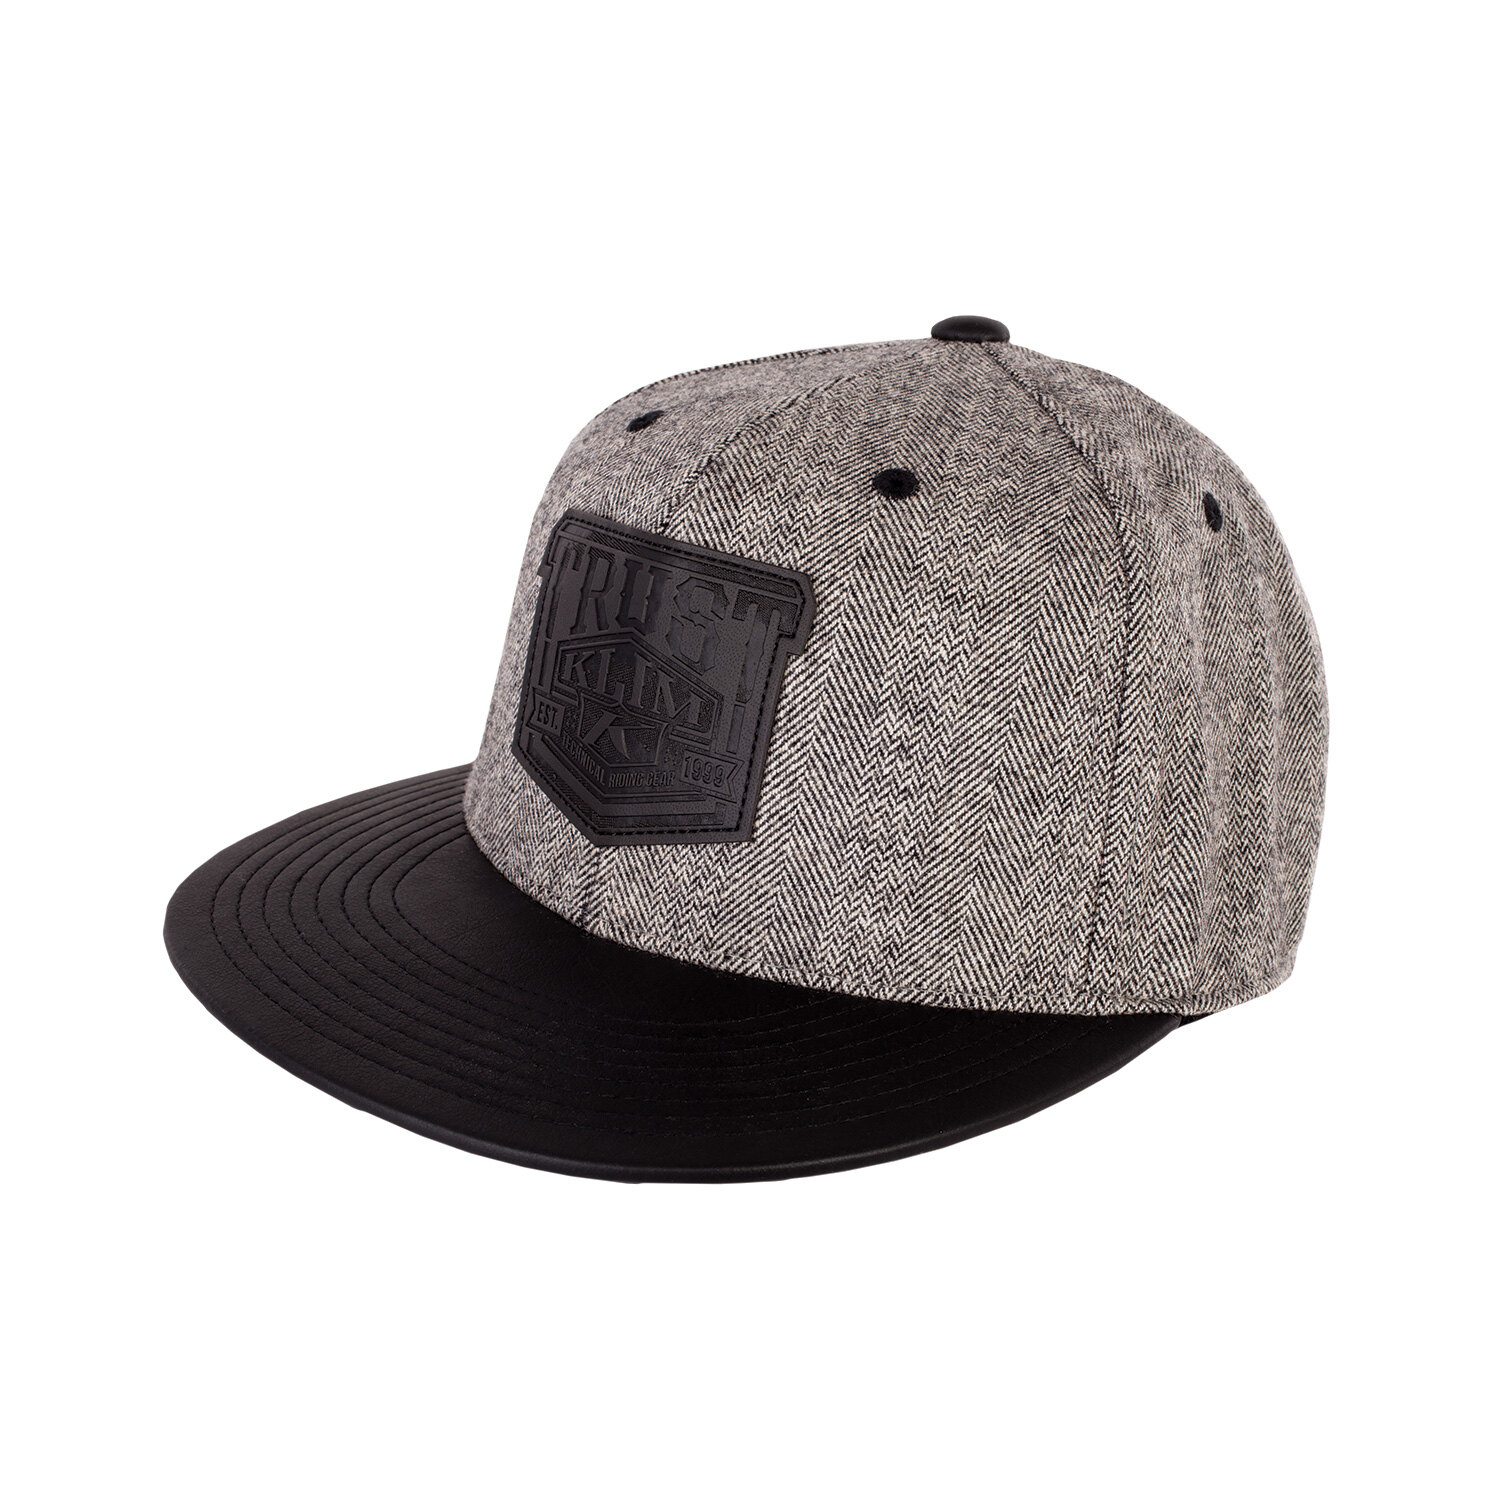 Trust Hat (Non Current) SM MD Gray